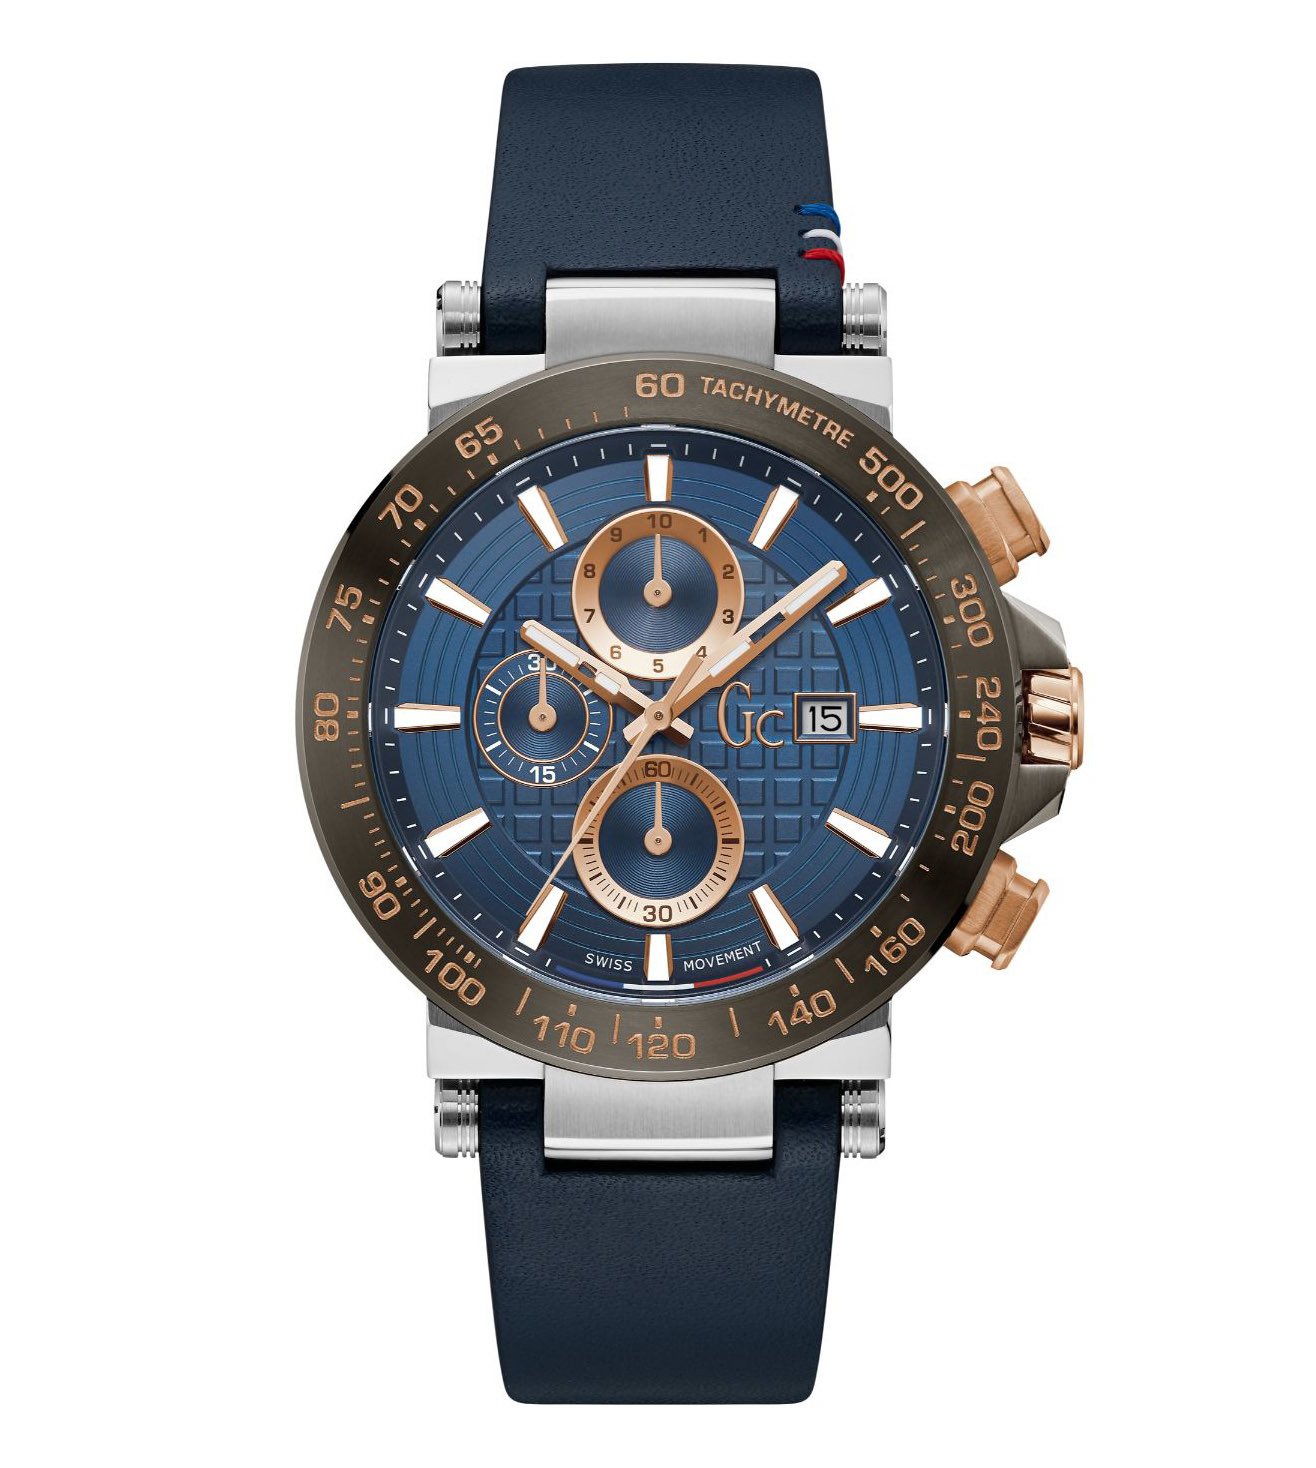 GC FIRST CLASS CHRONO LEATHER